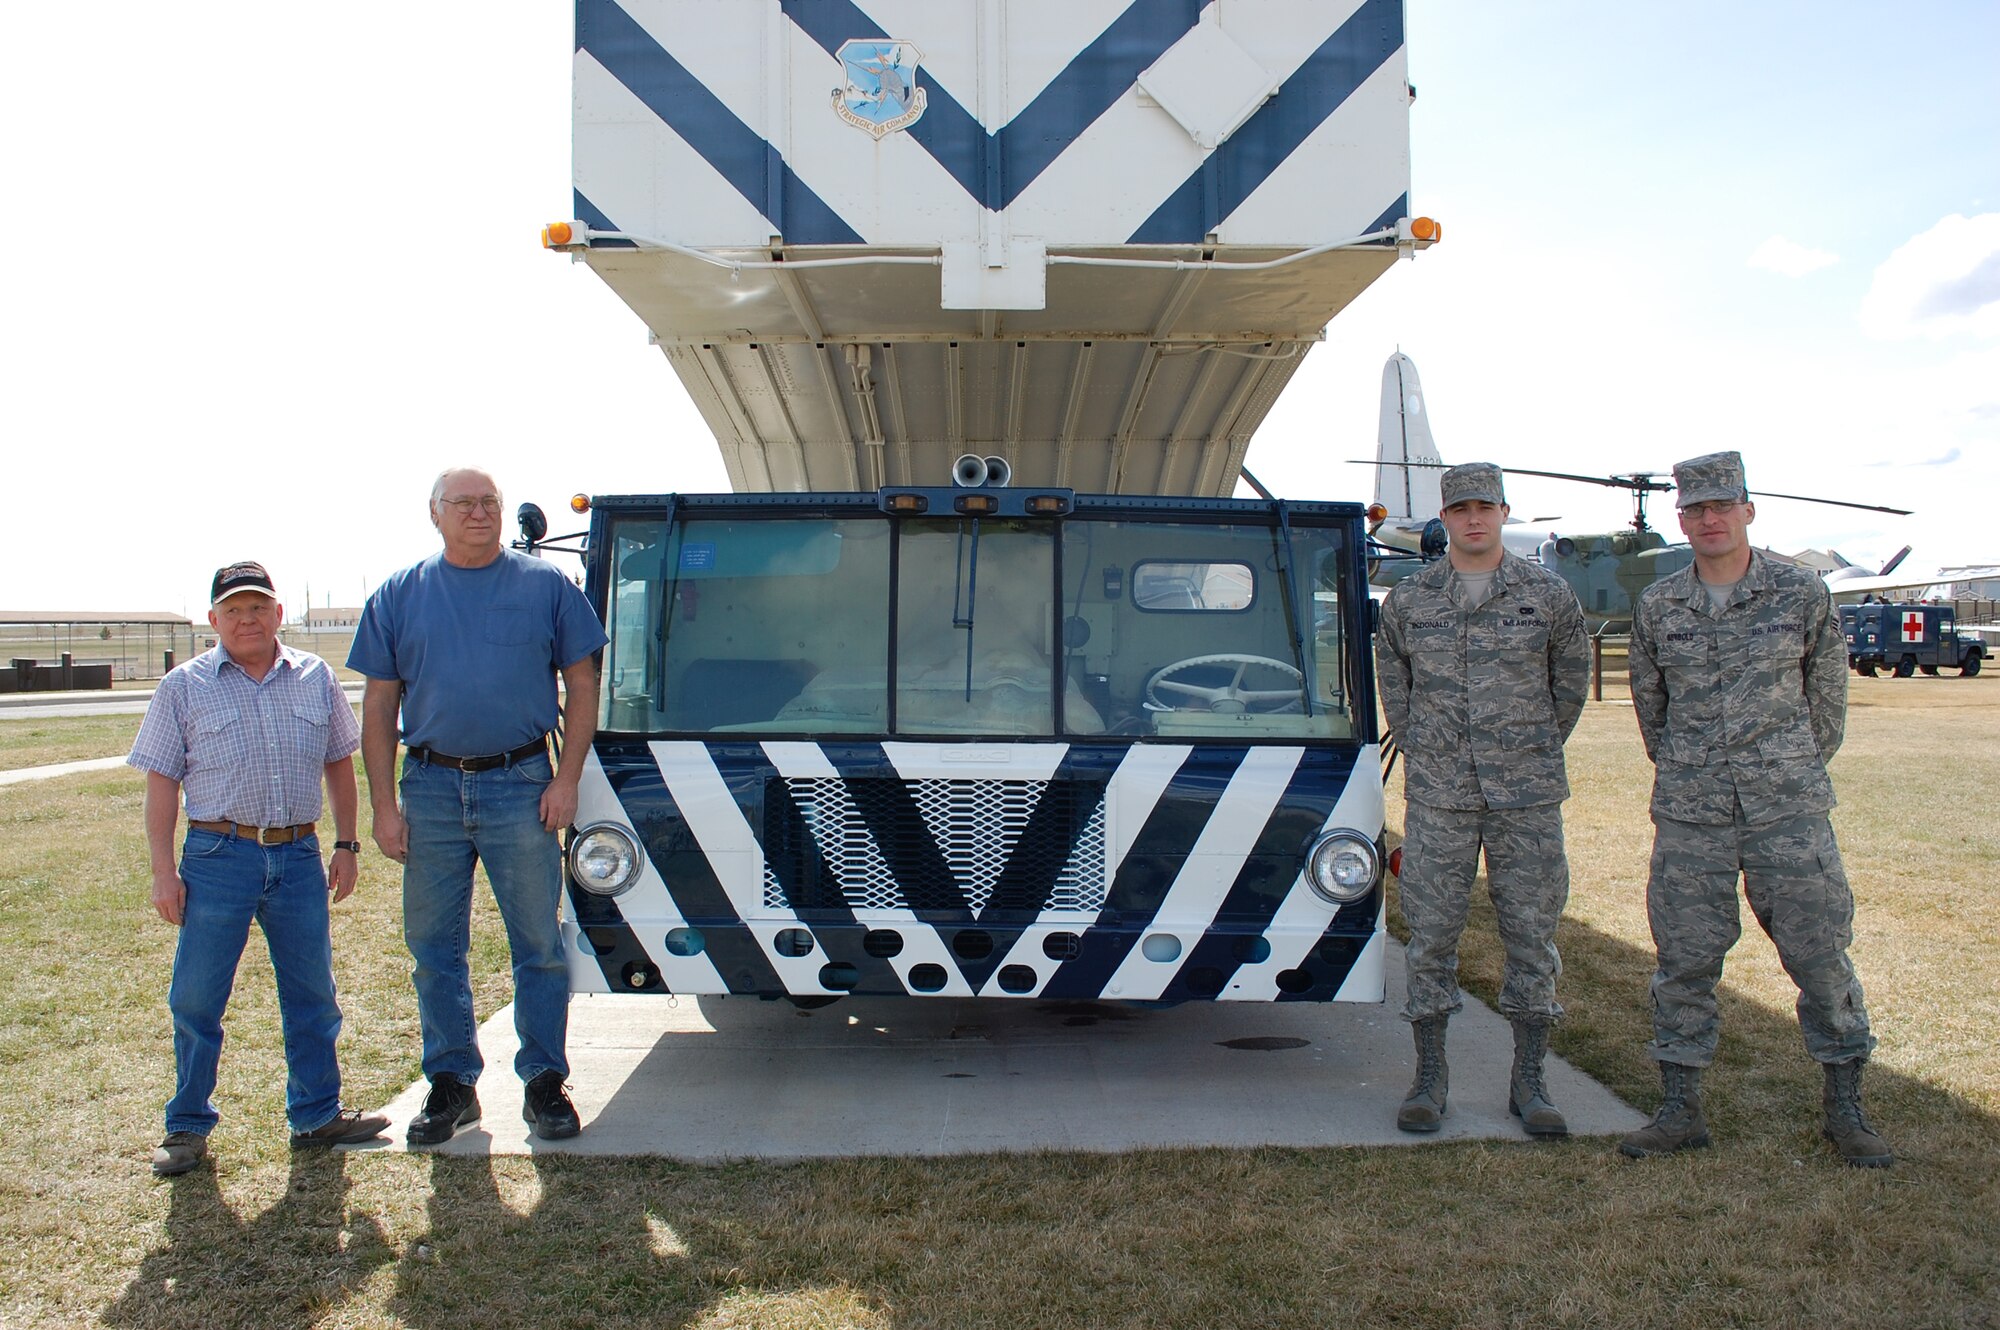 The four individuals who are responsible for the restoration of this 1962 transporter erector are, left to right, Dave Marzolf, Rex Jewitt, Senior Airman Shane McDonald and Senior Airman Bryan Seybold. (U.S. Air Force photo/Valerie Mullett)